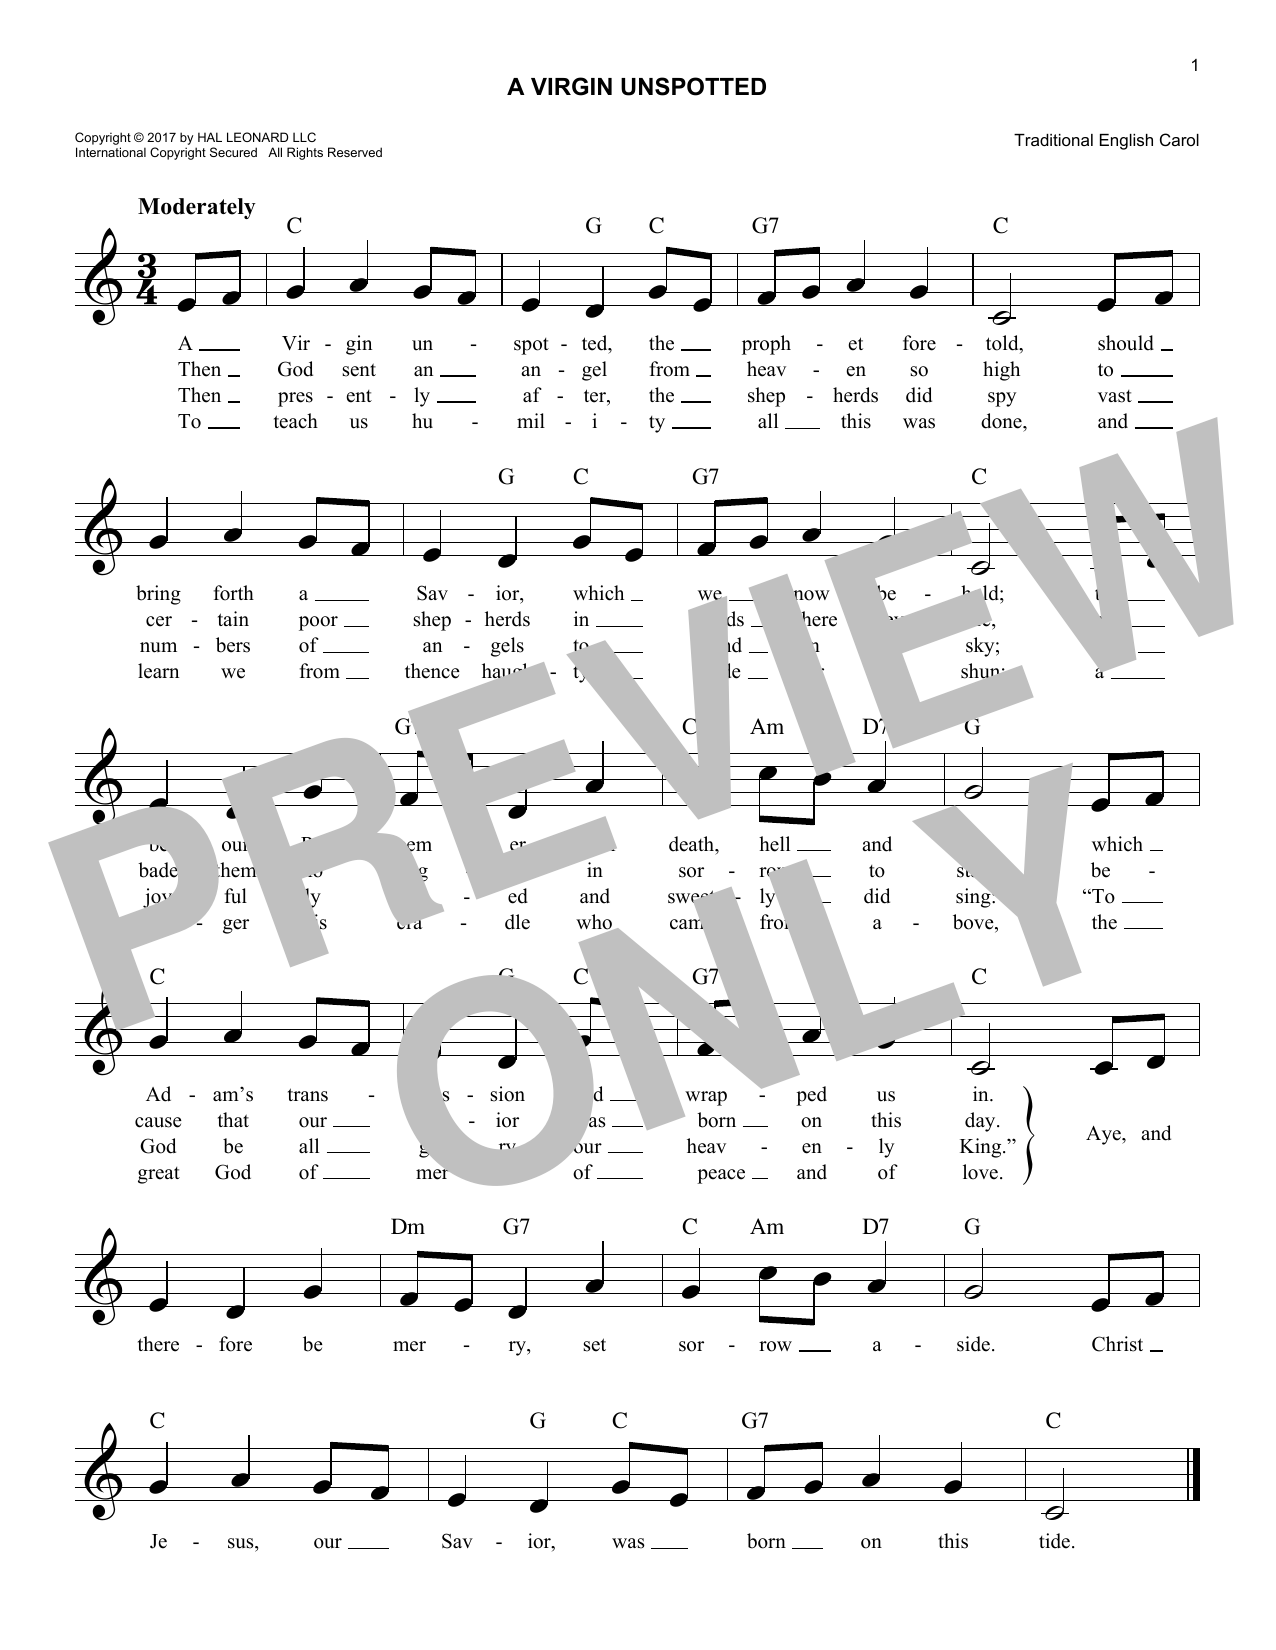 Download Traditional English Carol A Virgin Unspotted Sheet Music